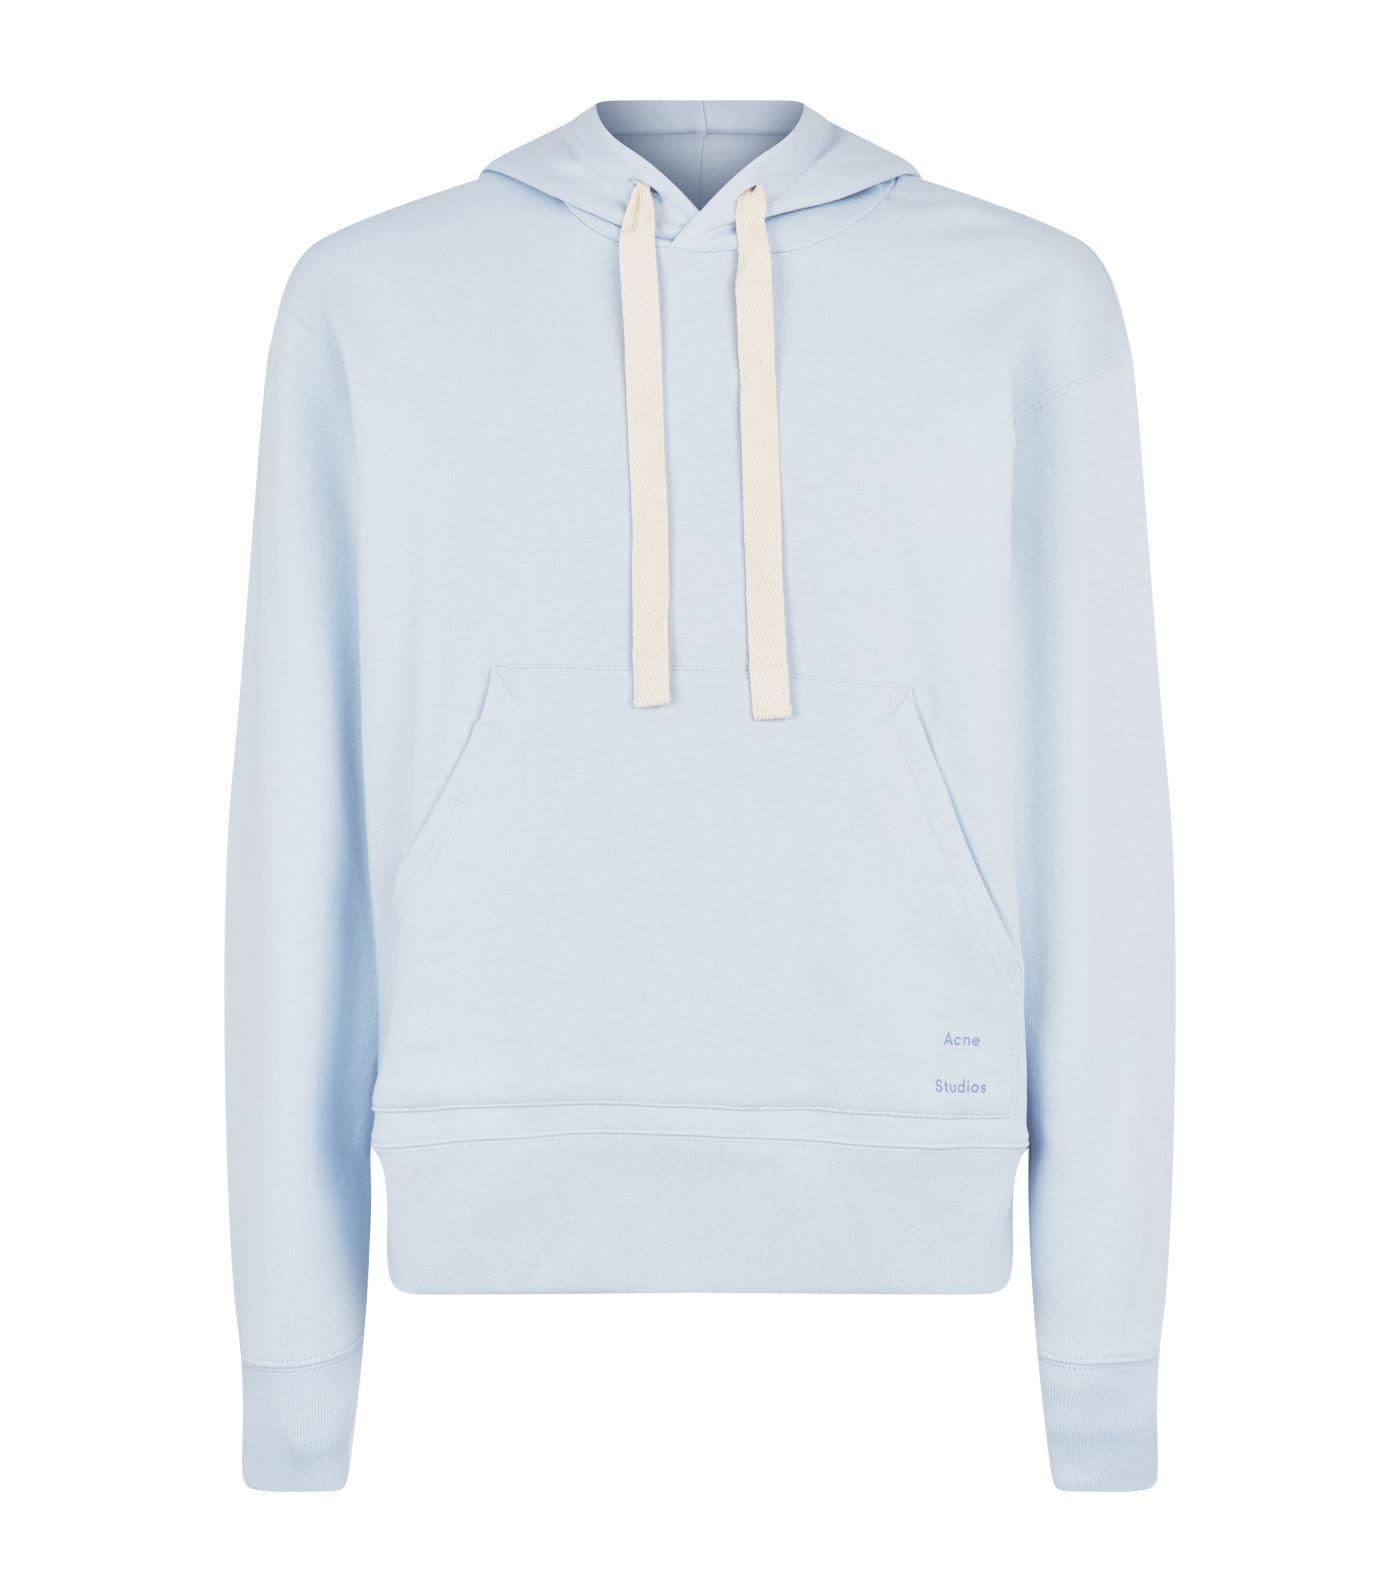 Lyst - Acne Studios Cotton Hoodie in Blue for Men